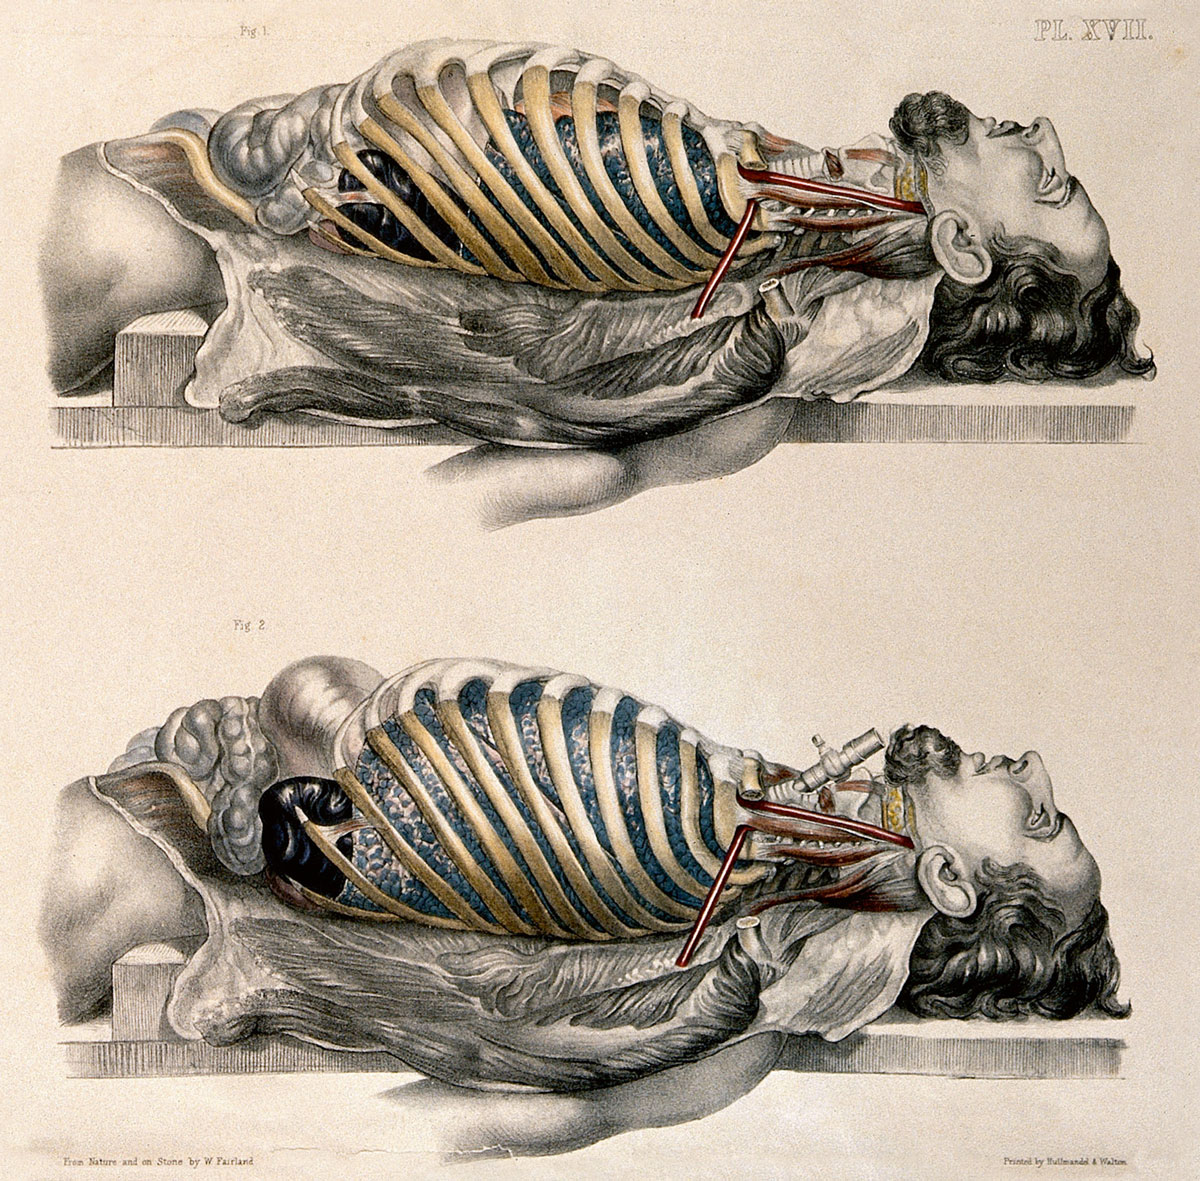 An 1869 lithograph by William Fairland documenting the work of anatomist Francis Sibson. The two figures show the lungs after breathing out and after breathing in. 